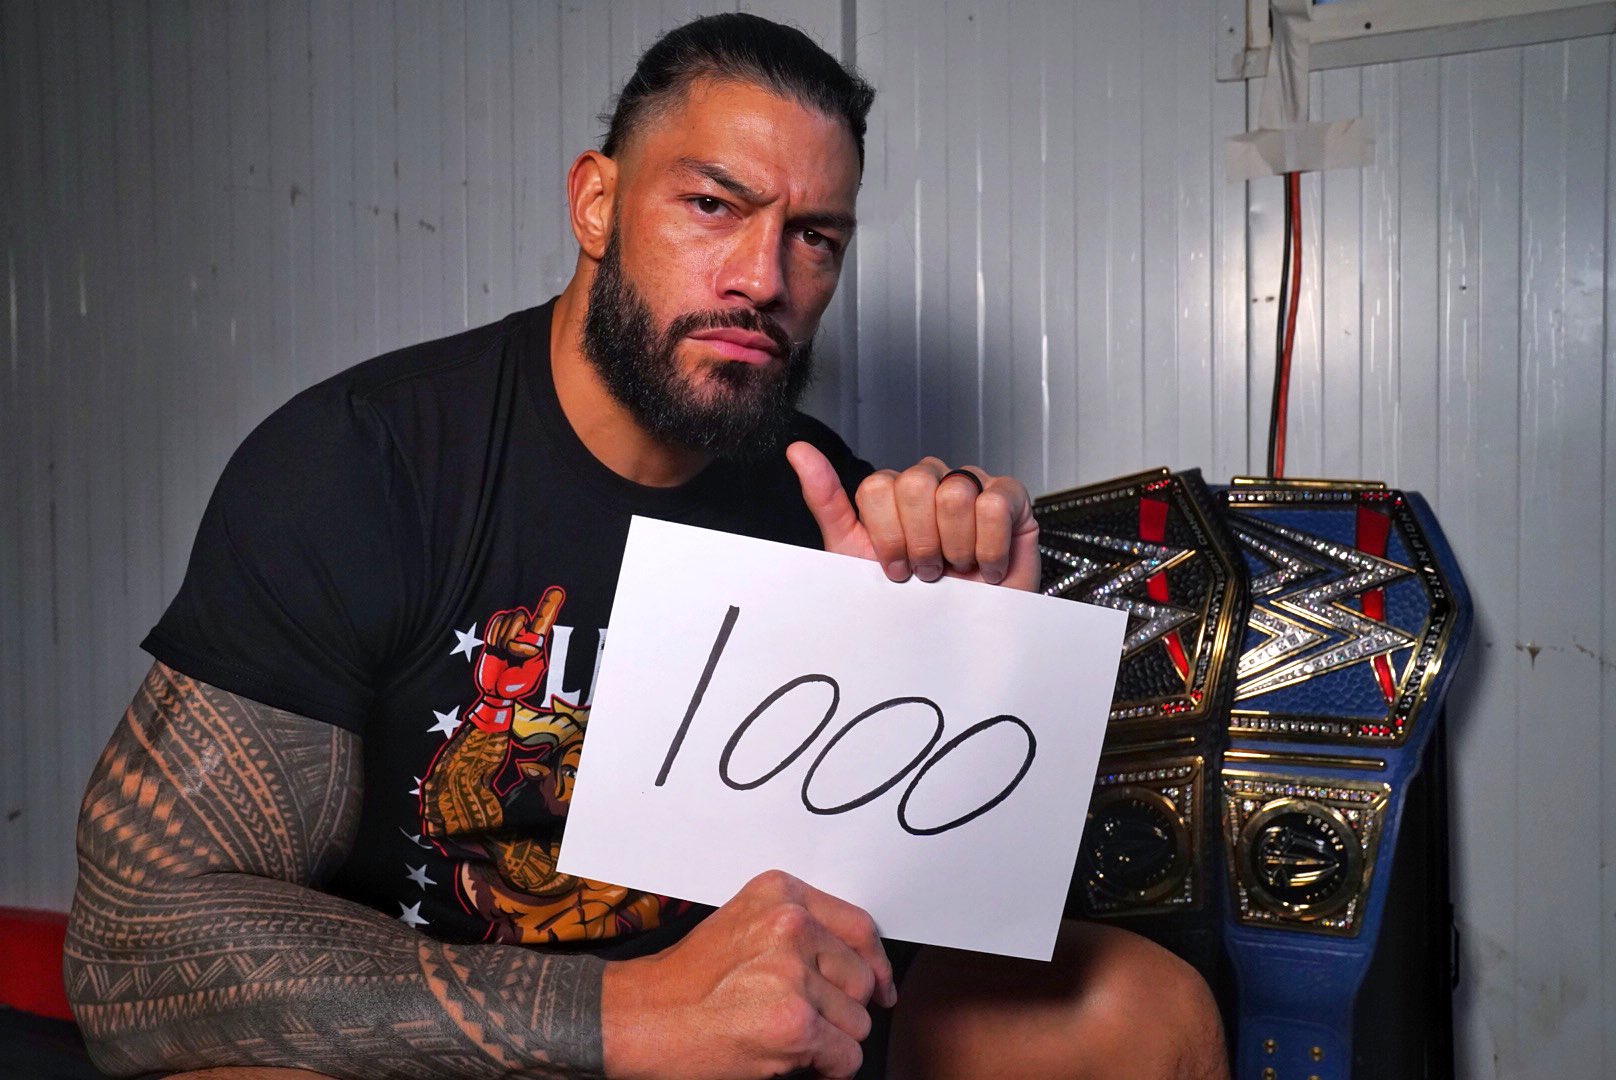 WWE SmackDown Preview: Roman Reigns 1000 days celebration, qualifying matches for MITB 2023 and more